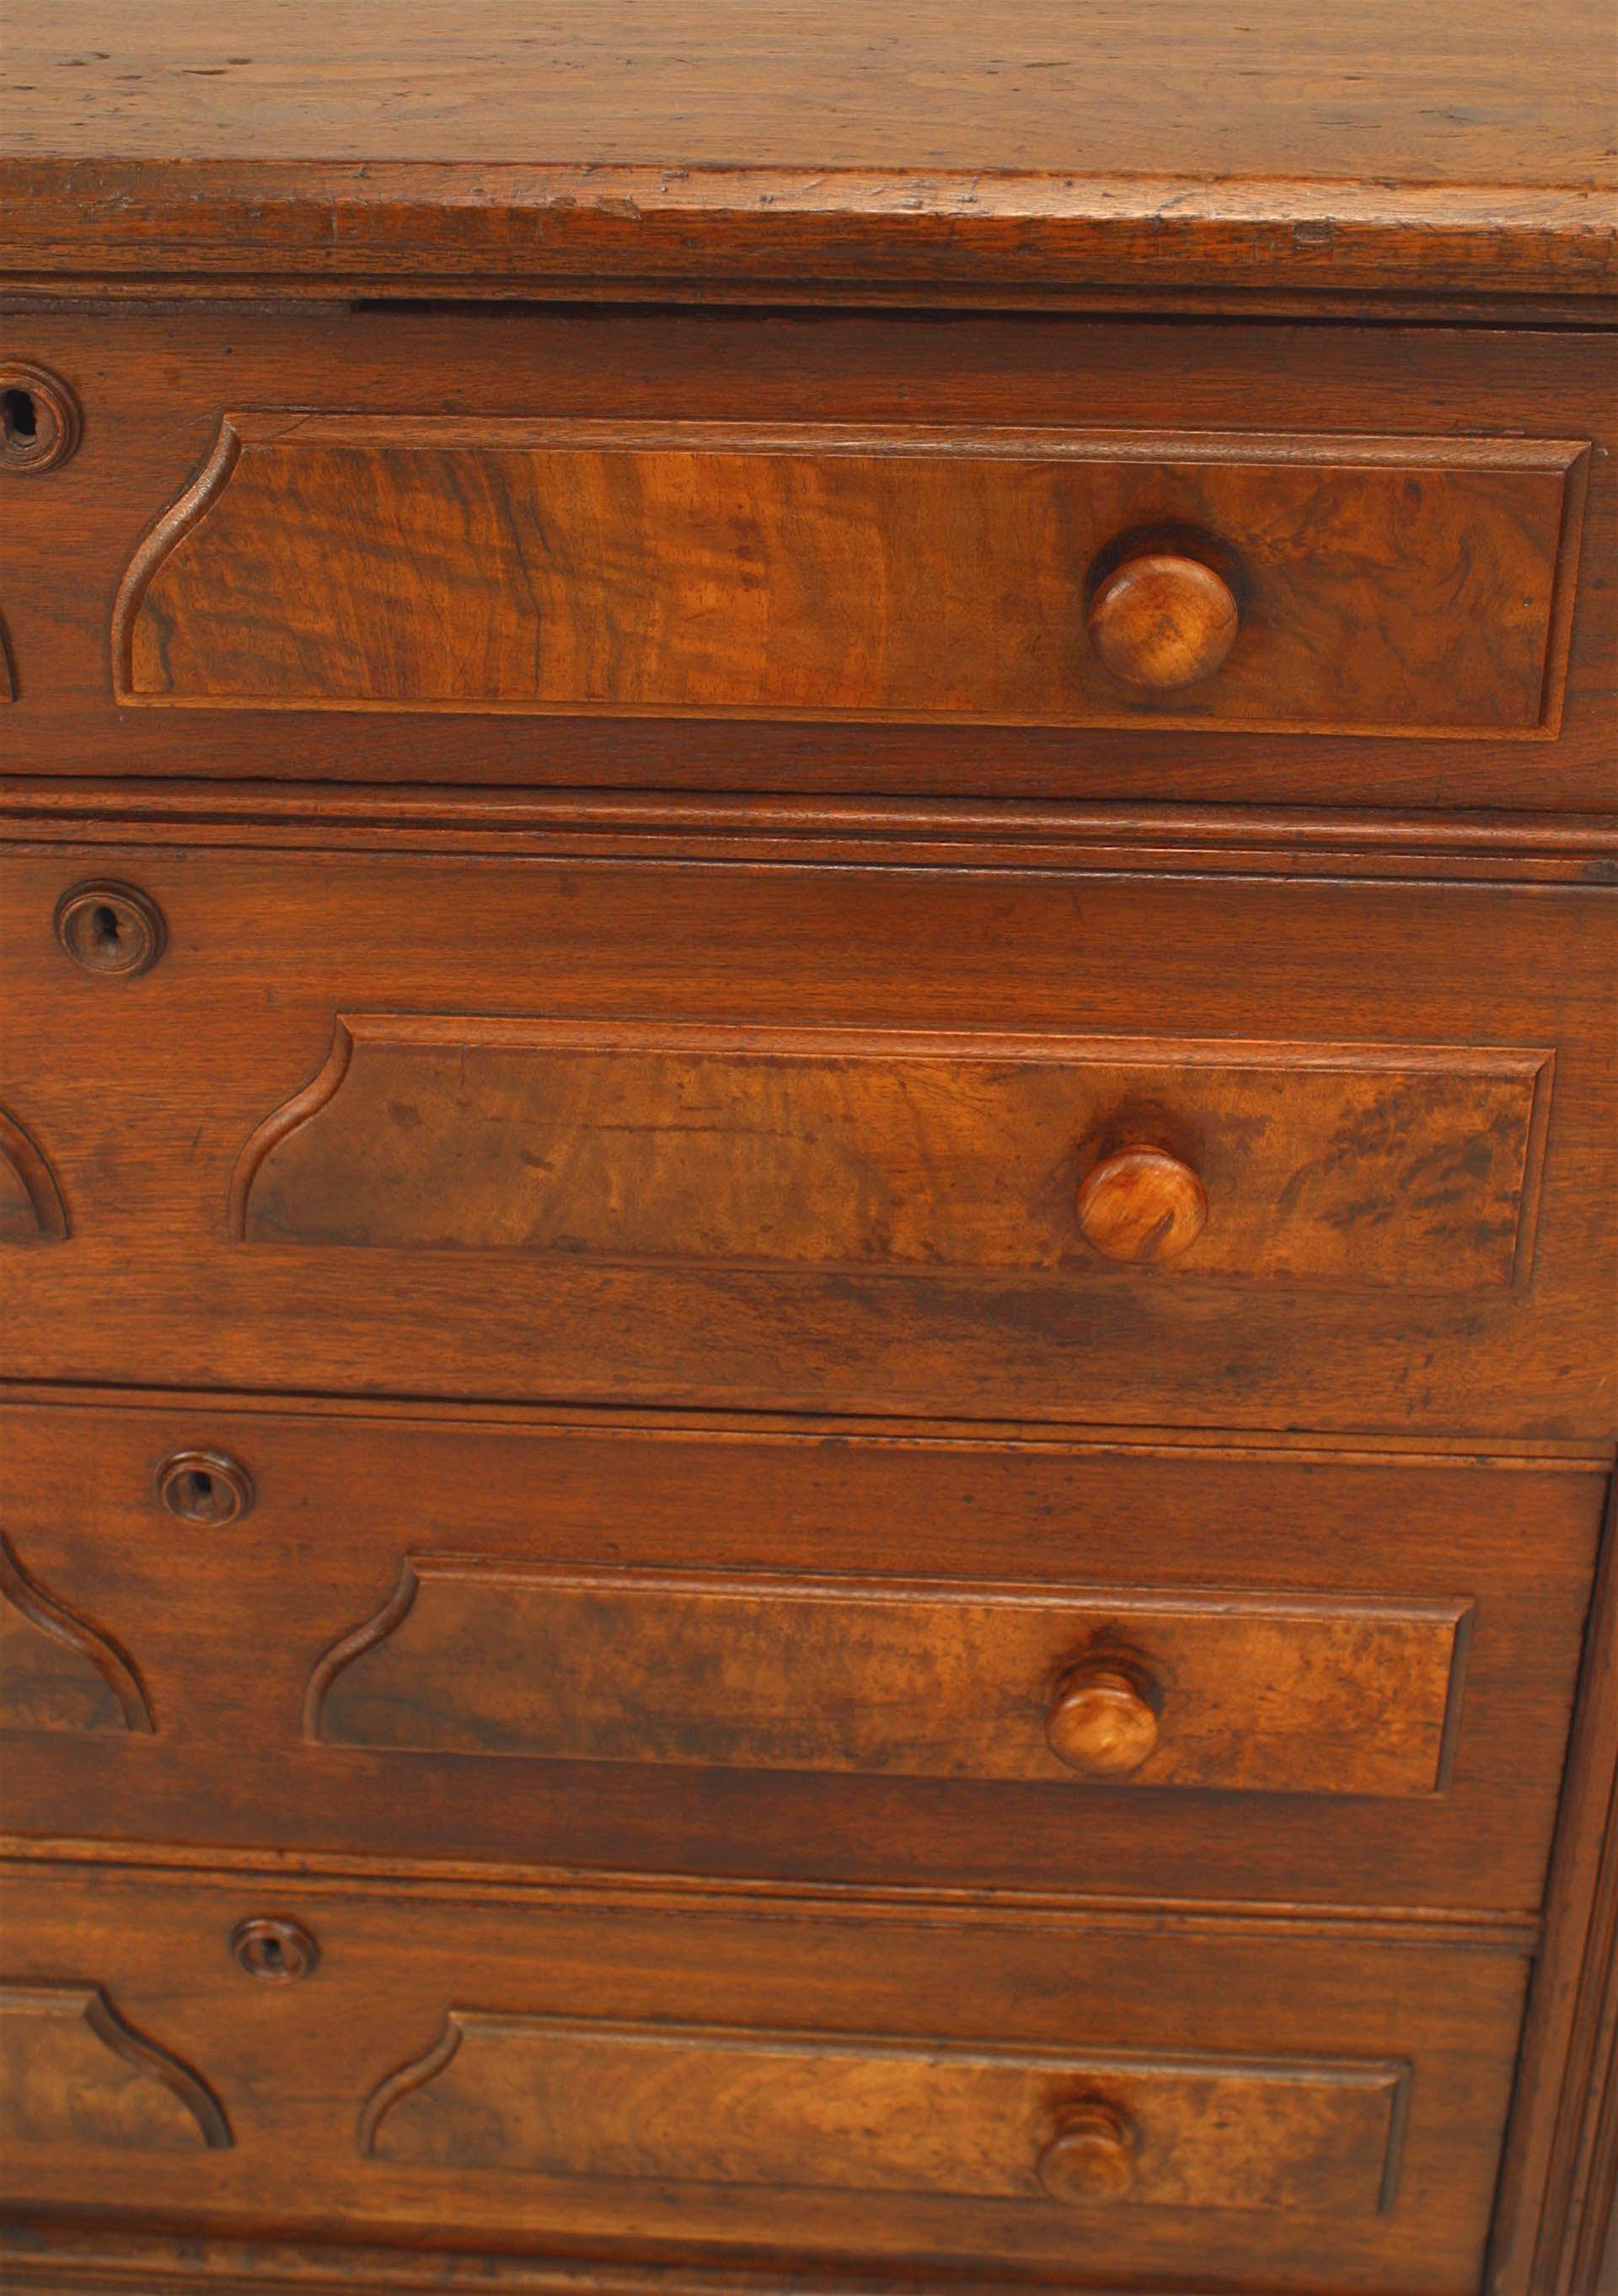 American Victorian walnut chest with fluted sides and 4 drawers with 2 burl wood panels on each drawer.
